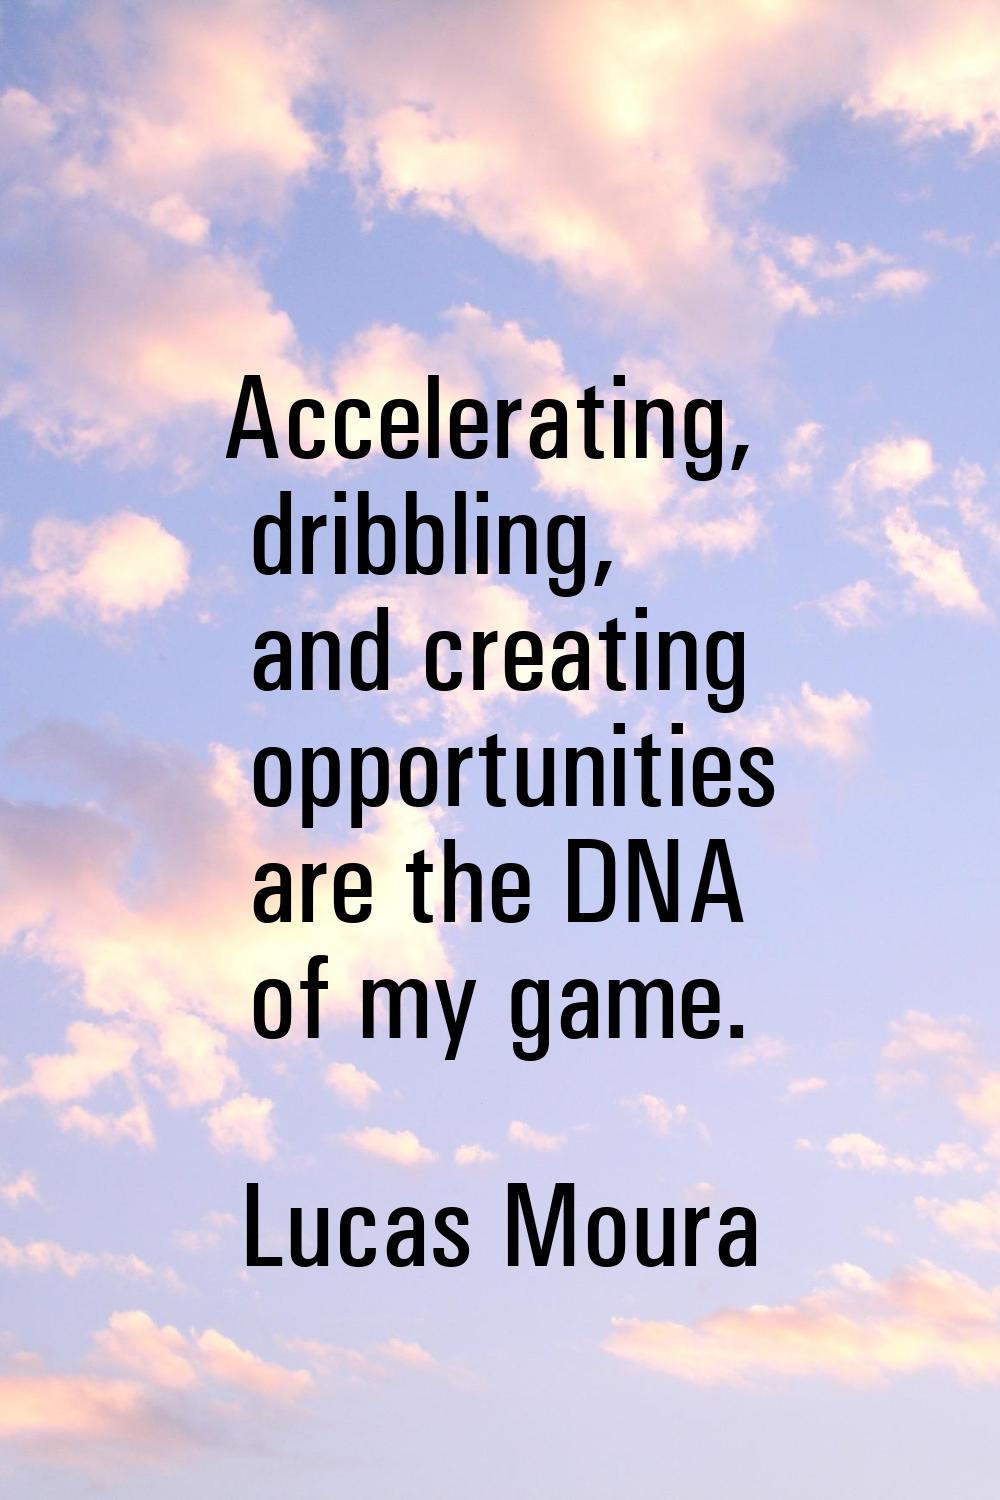 Accelerating, dribbling, and creating opportunities are the DNA of my game.